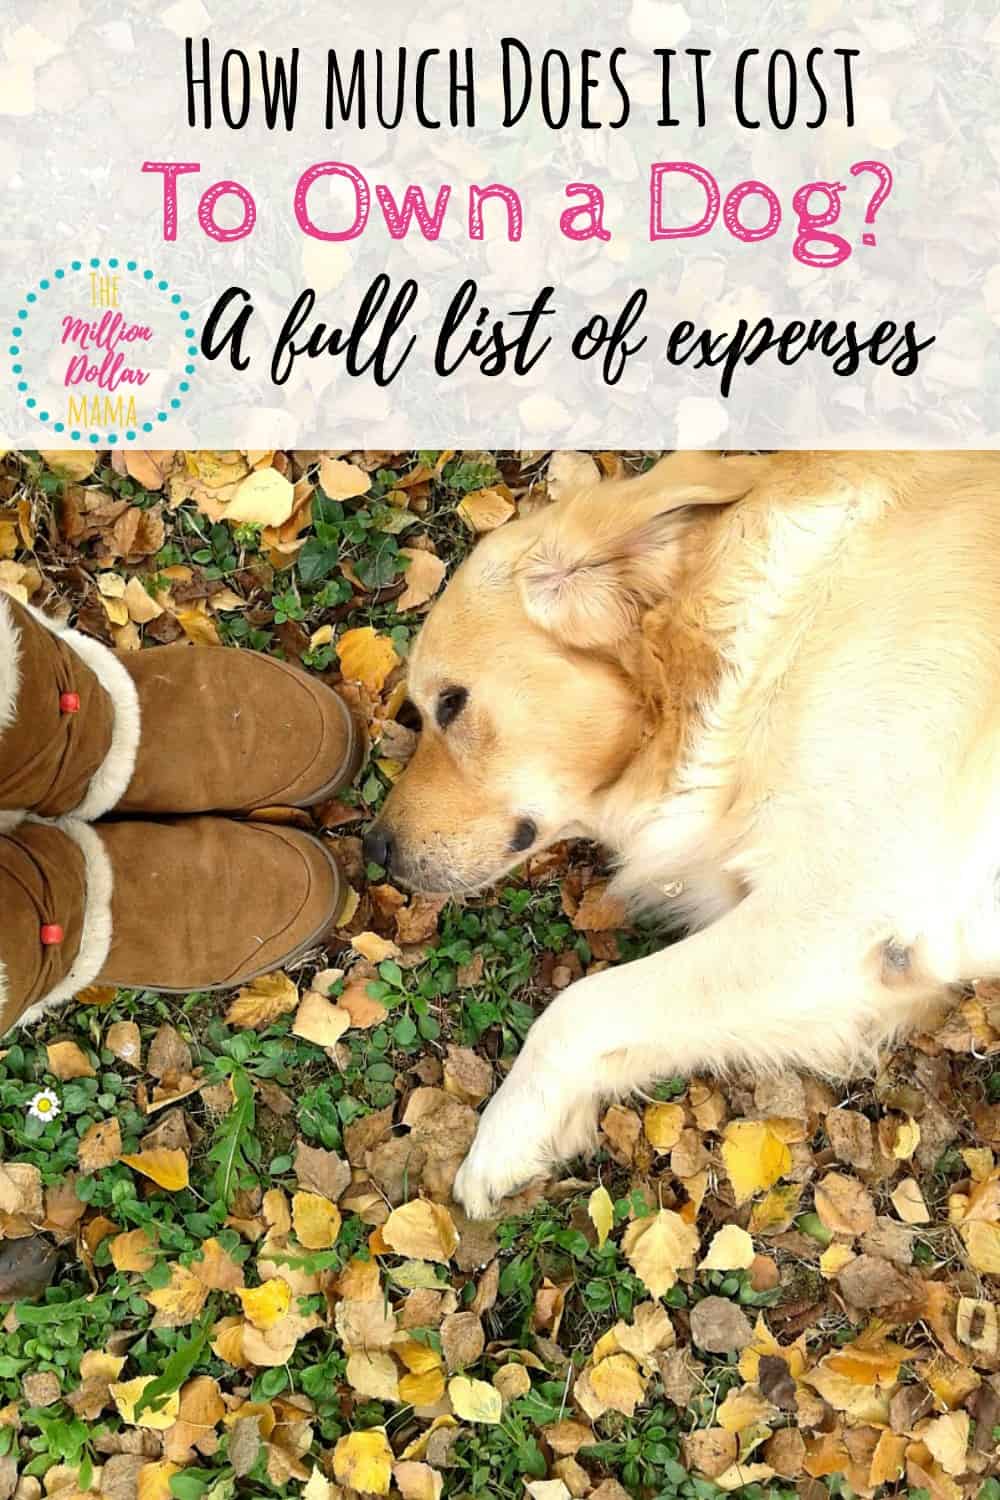 How much does it cost to own a dog? List of pet expenses | Cost of pet ownership | How much does a dog cost each year